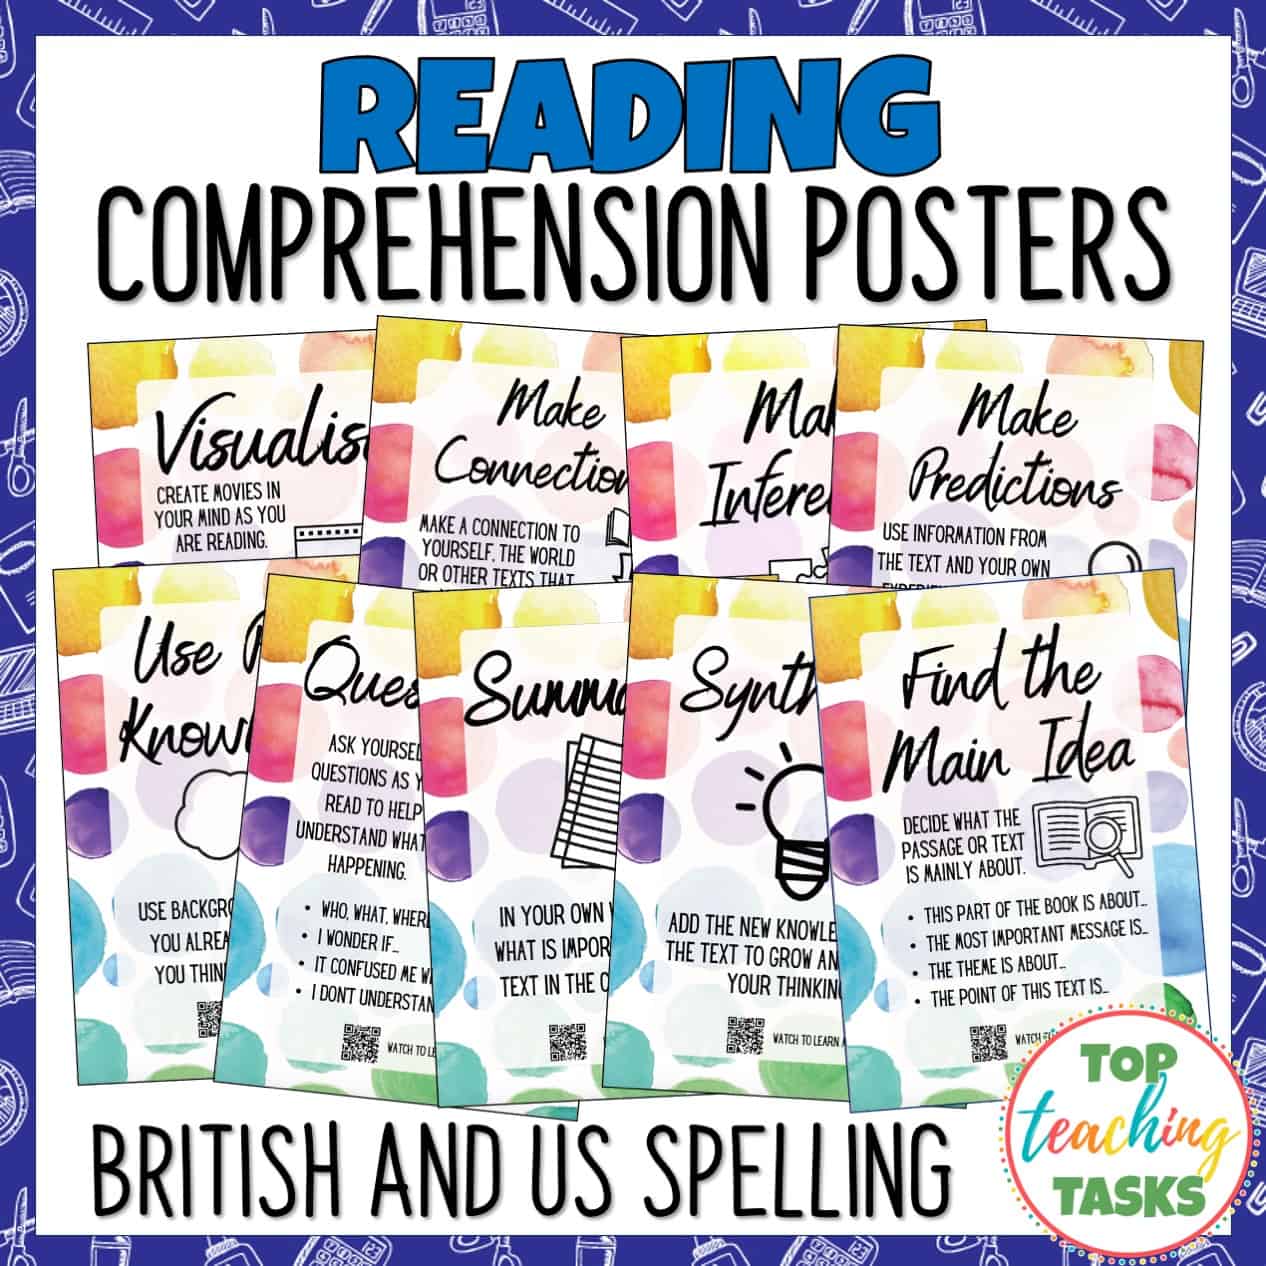 reading strategies posters for middle school